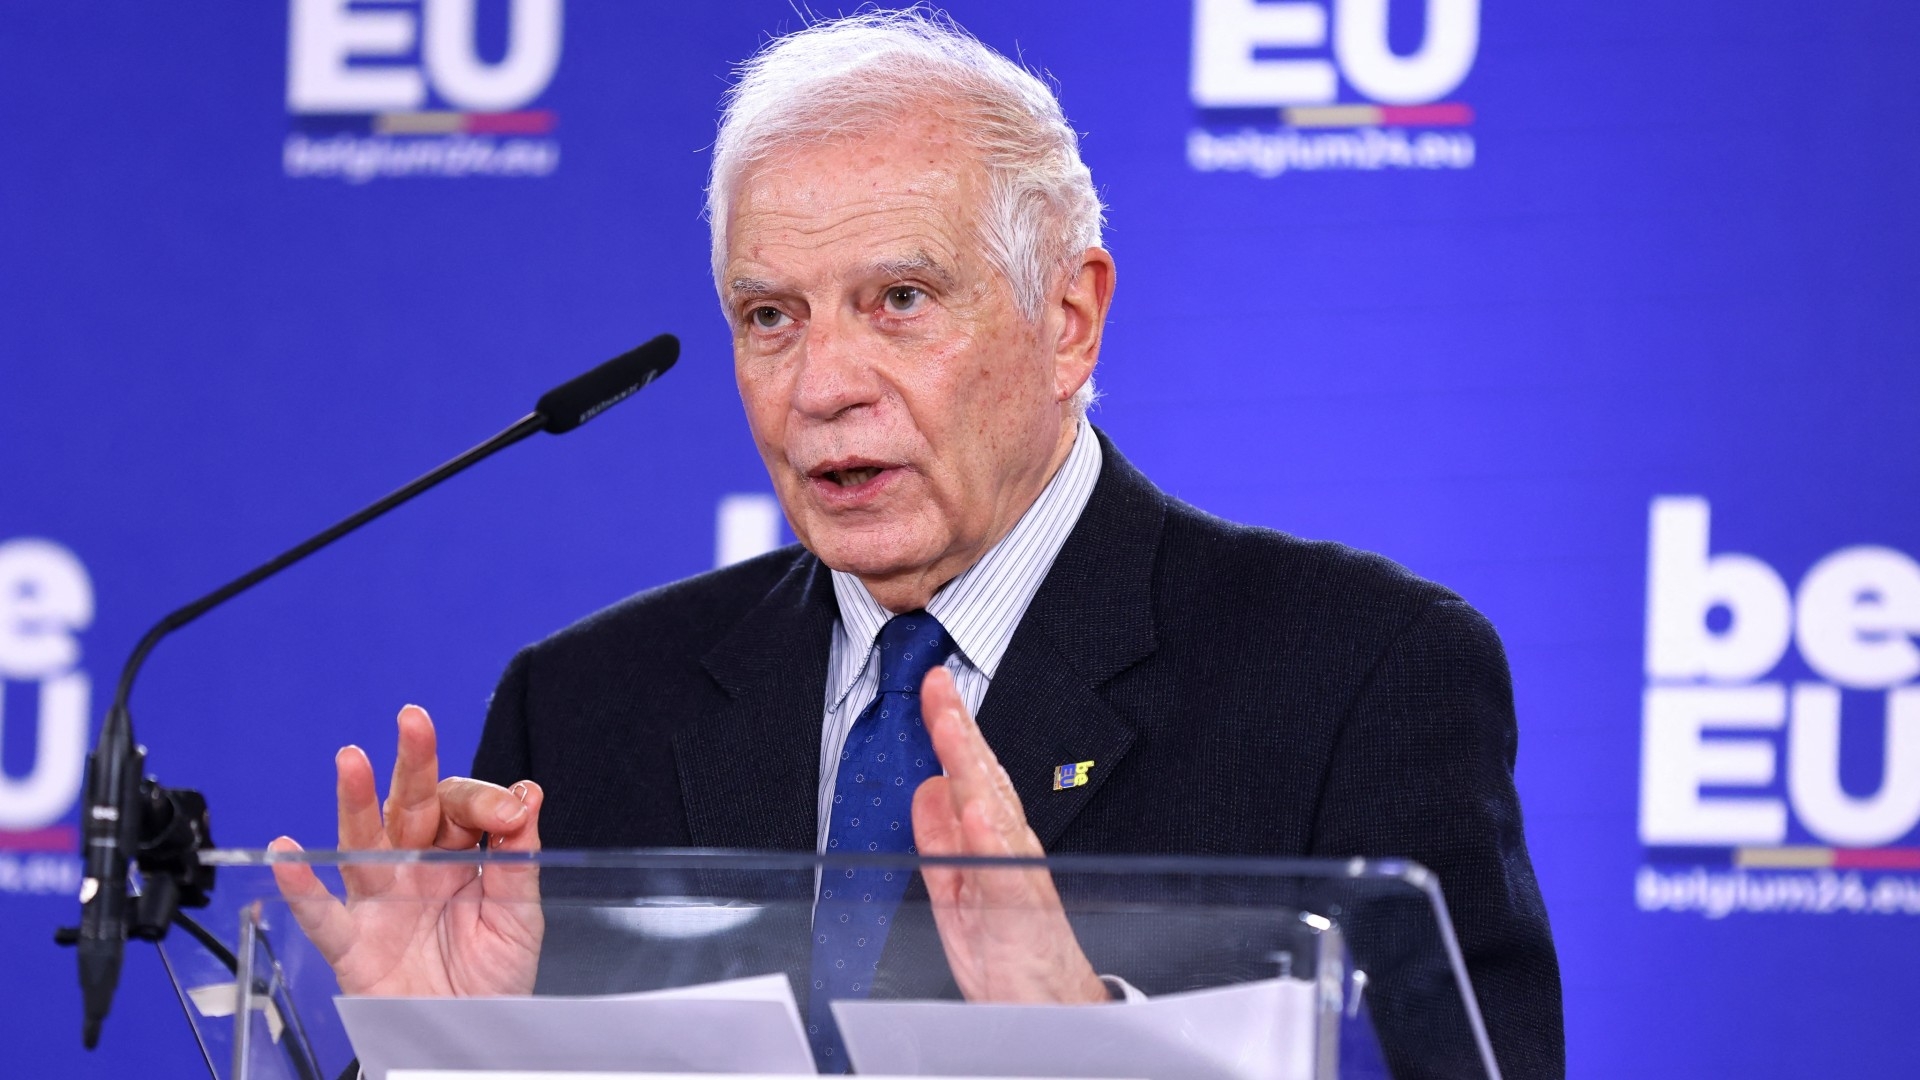 European Union foreign policy chief Josep Borrell speaks during a press conference in Brussels on 12 February 2023 (AFP/Kenzo Tribouillard) 